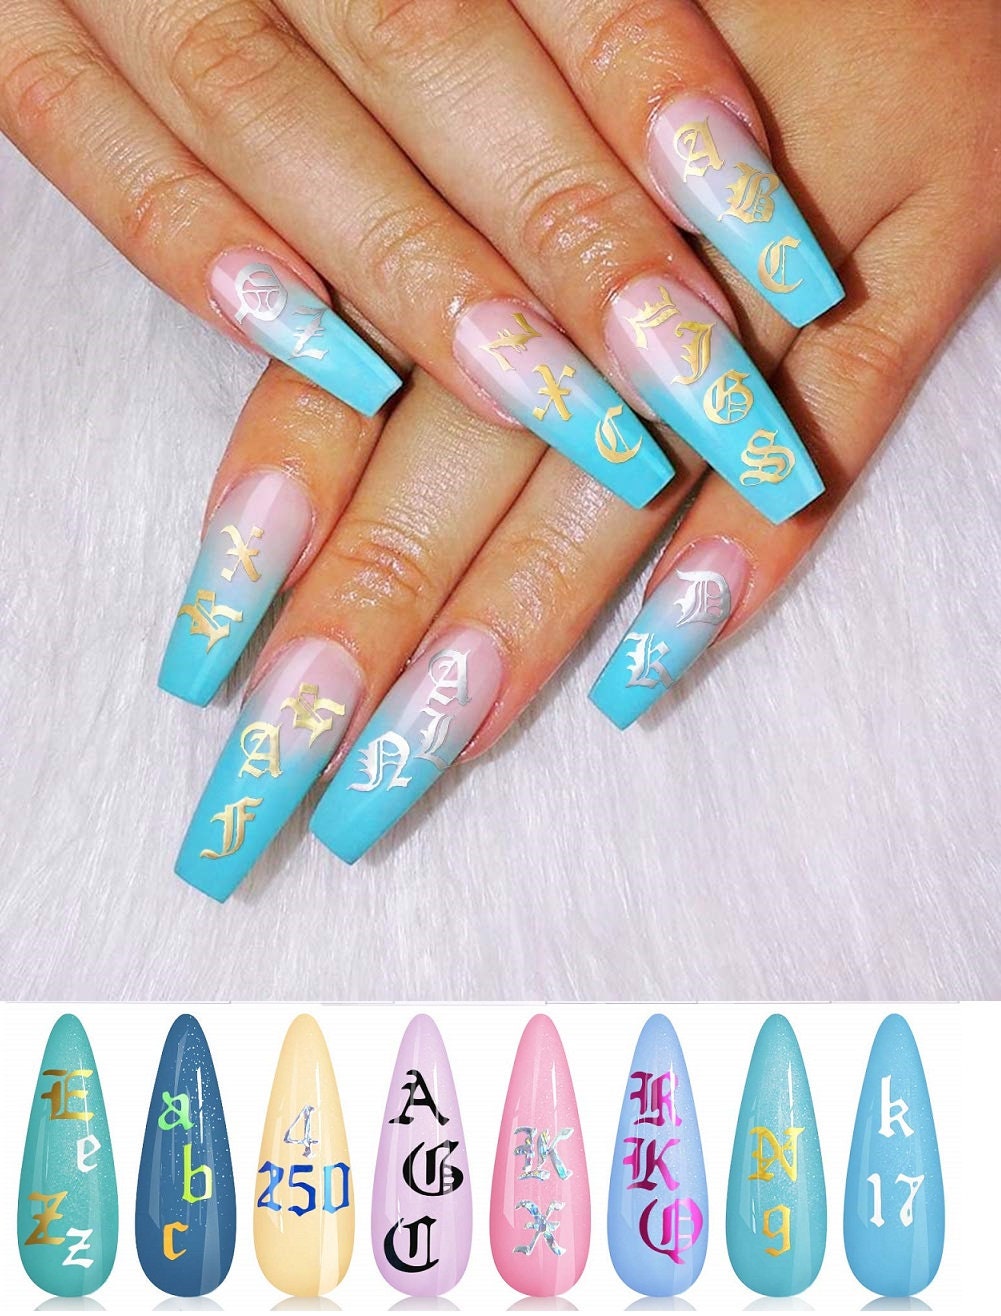 How To Make Press-on Nails  Louis Vuitton Nails + How To Make Nail Decals  With A Cricut 